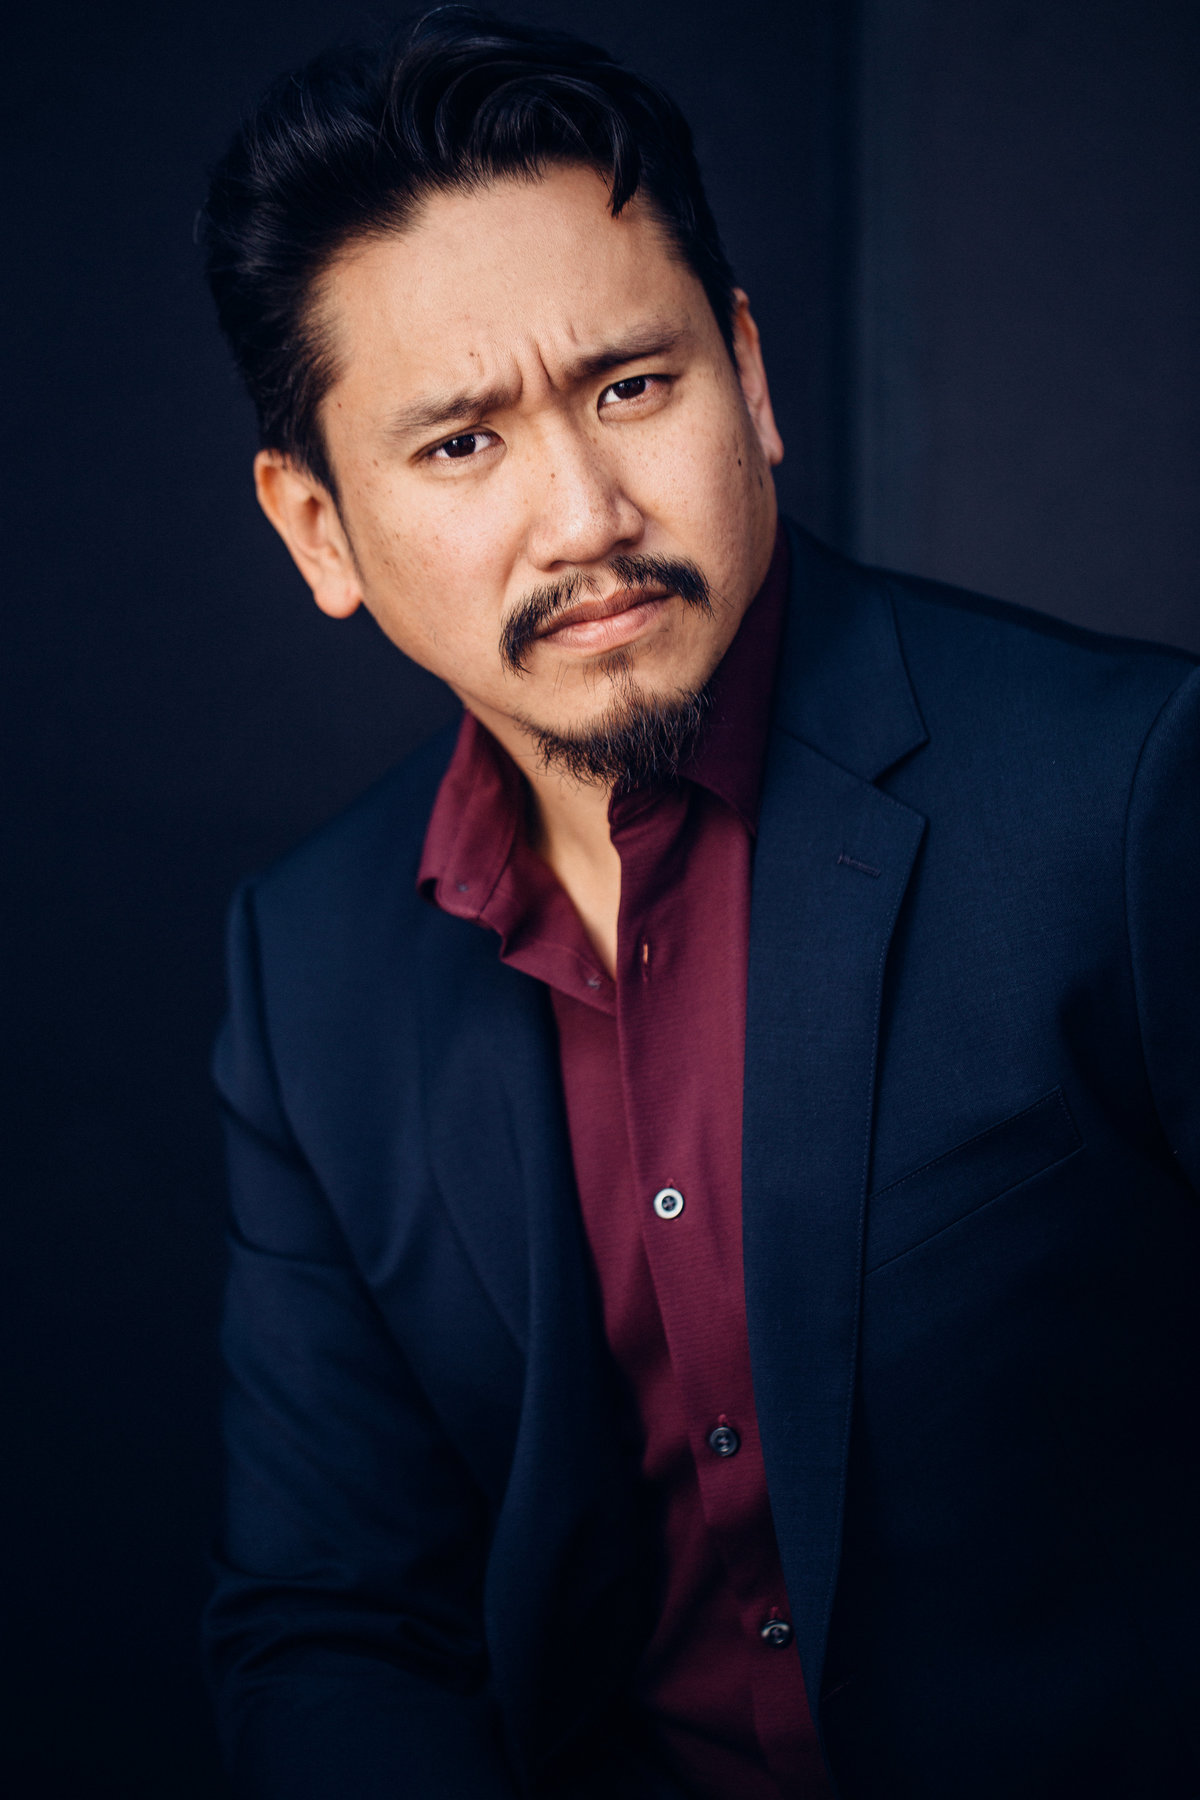 Headshot Photograph Of Man In Outer Black Suit And Inner Maroon Long Sleeves Los Angeles